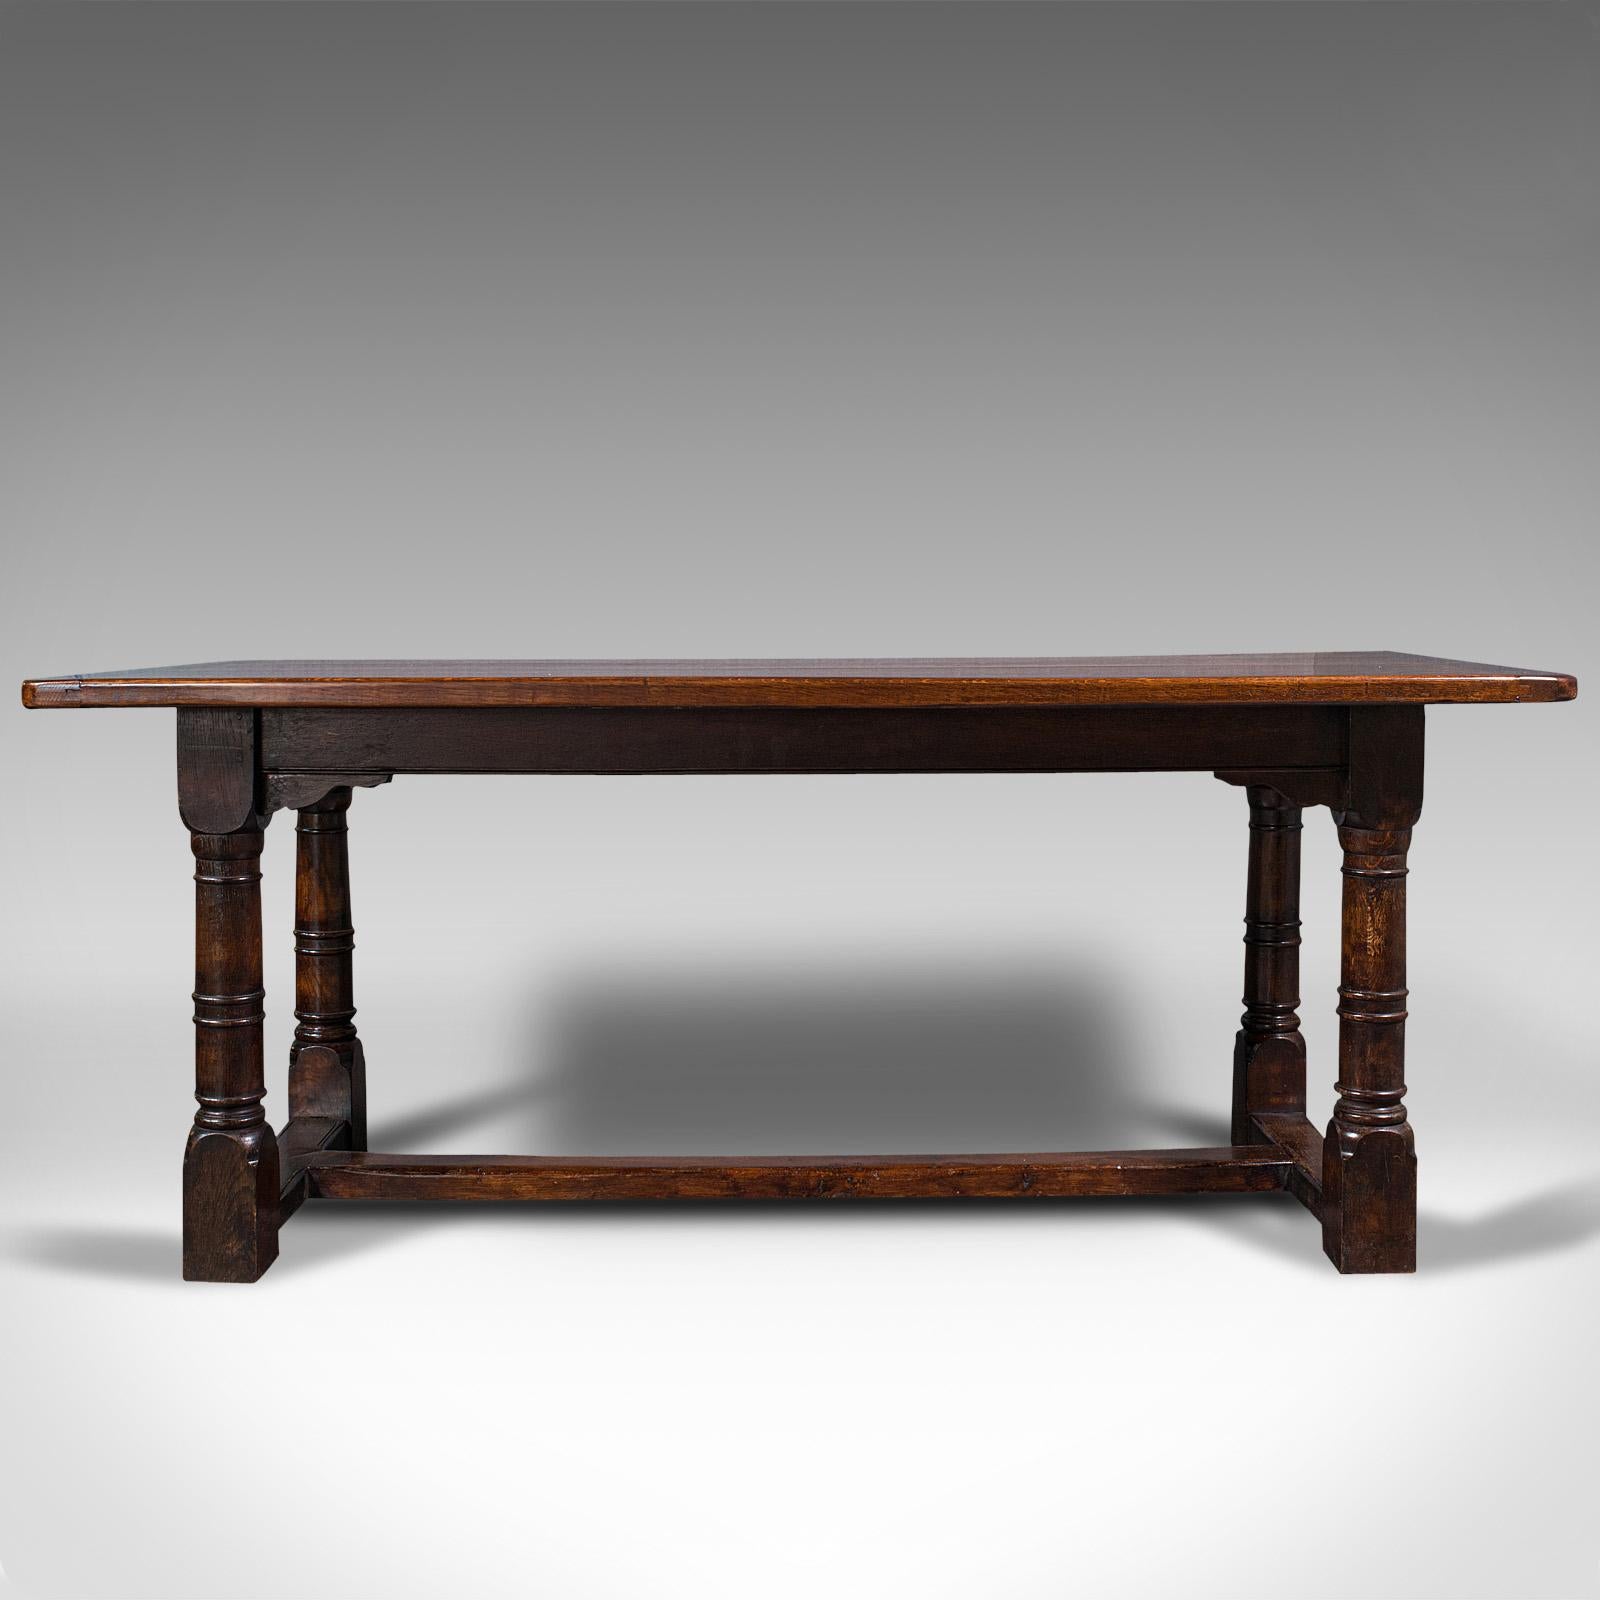 This is an antique refectory table. An English, quality oak 6 seat dining table, dating to the Victorian period, circa 1880.

Superbly figured and comfortably sized centrepiece table for six
Displays a desirable aged patina and in good